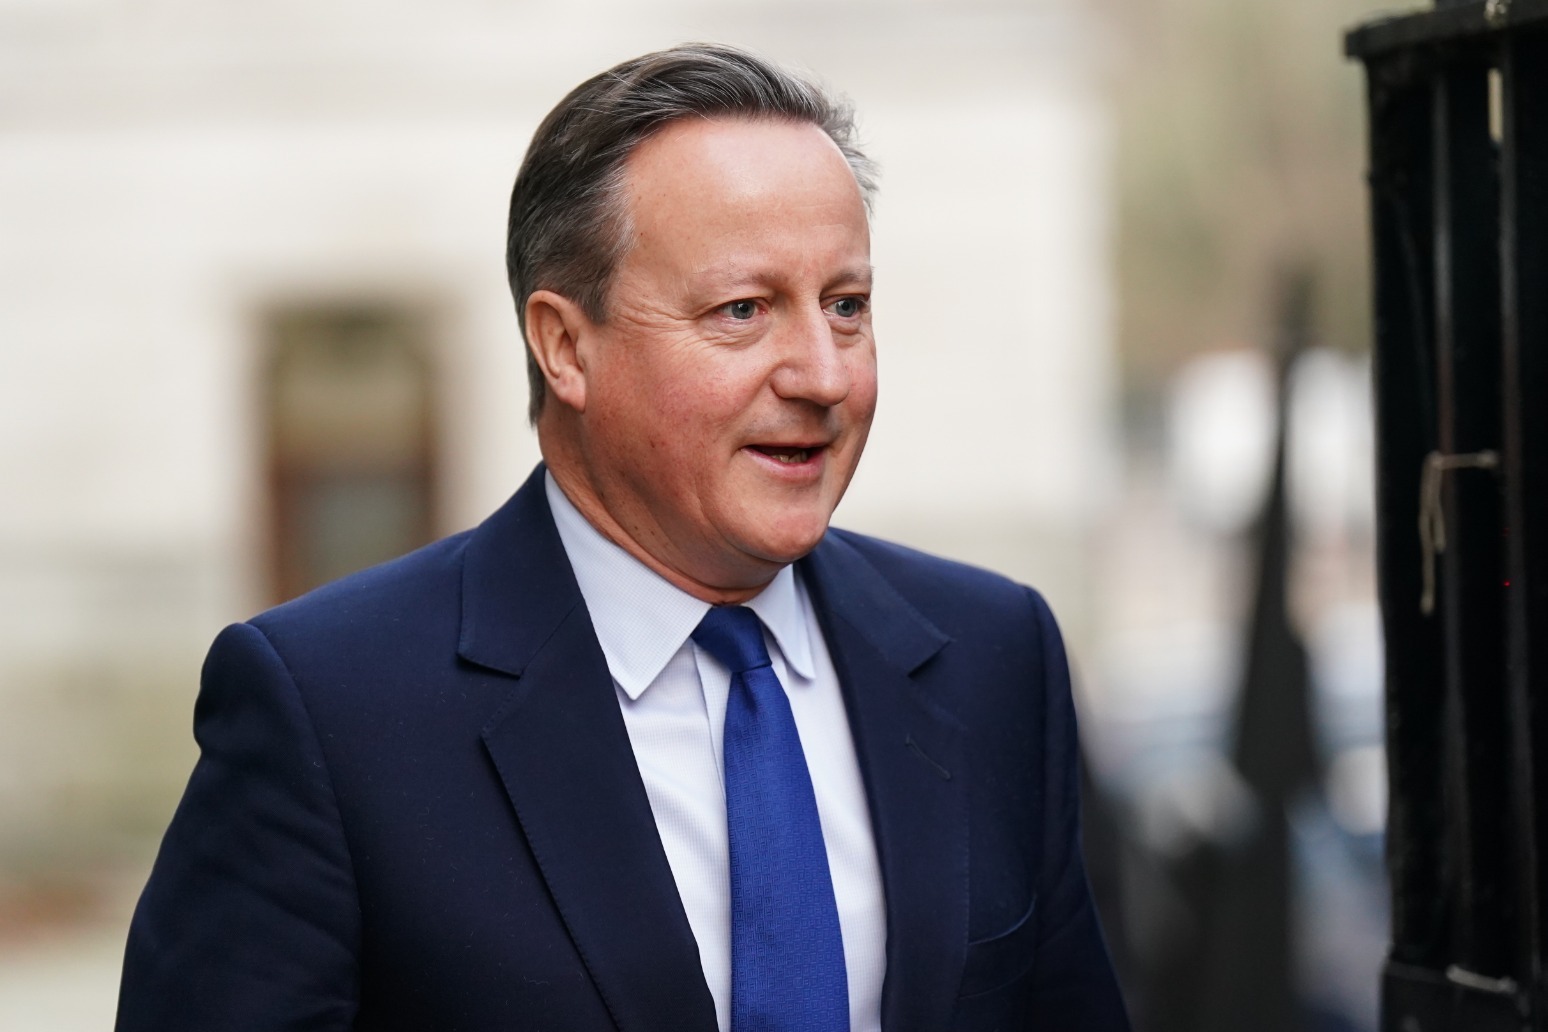 Lord Cameron to push for ‘urgent humanitarian pause’ in Gaza war on Middle East visit 